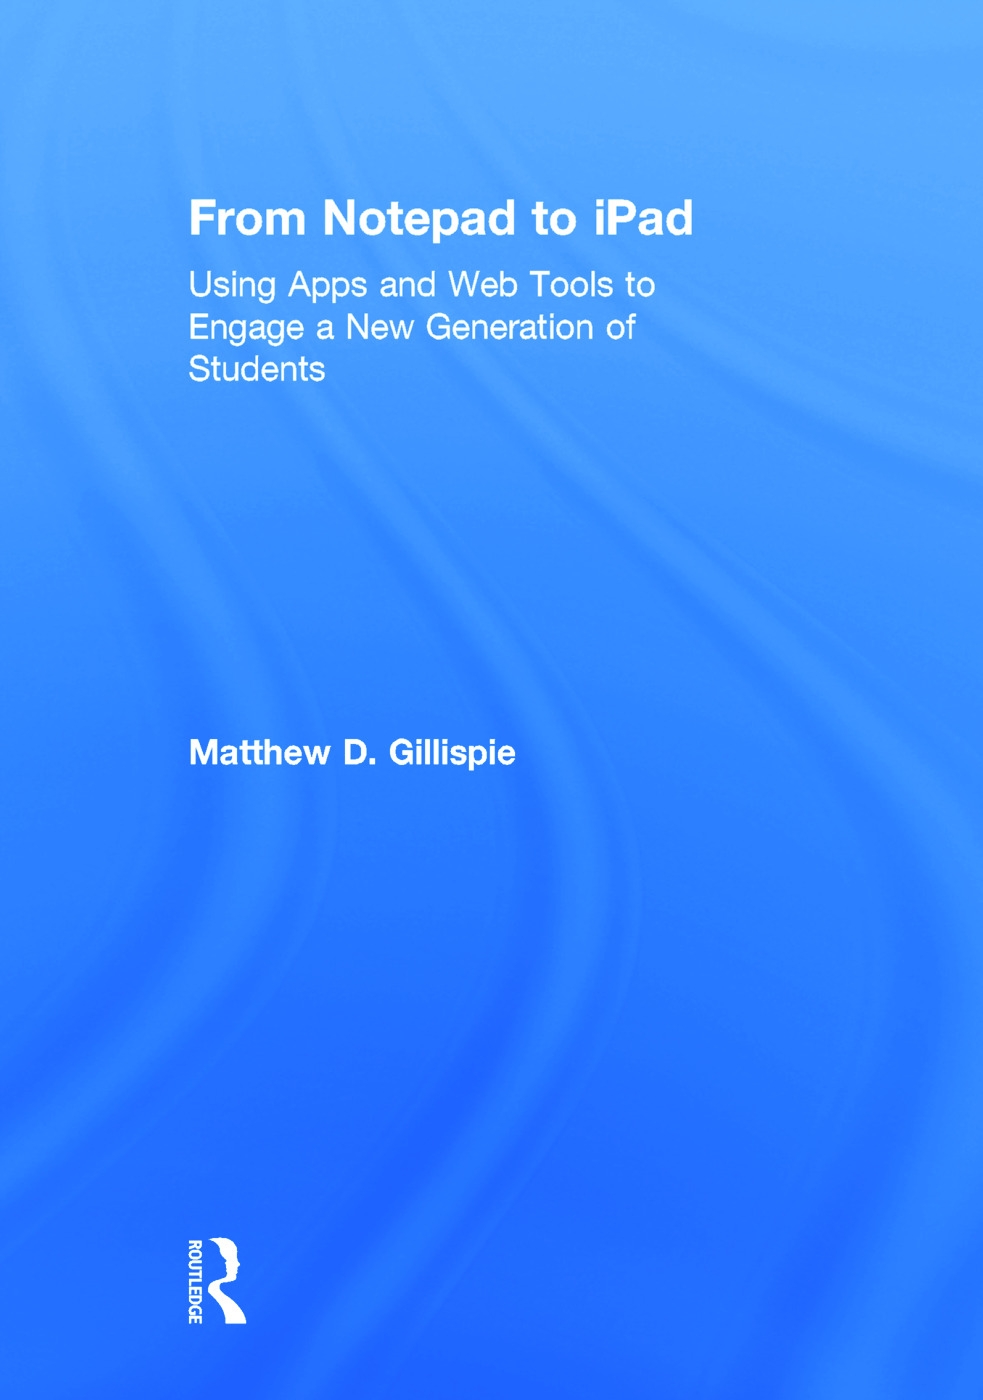 From Notepad to iPad: Using Apps and Web Tools to Engage a New Generation of Students